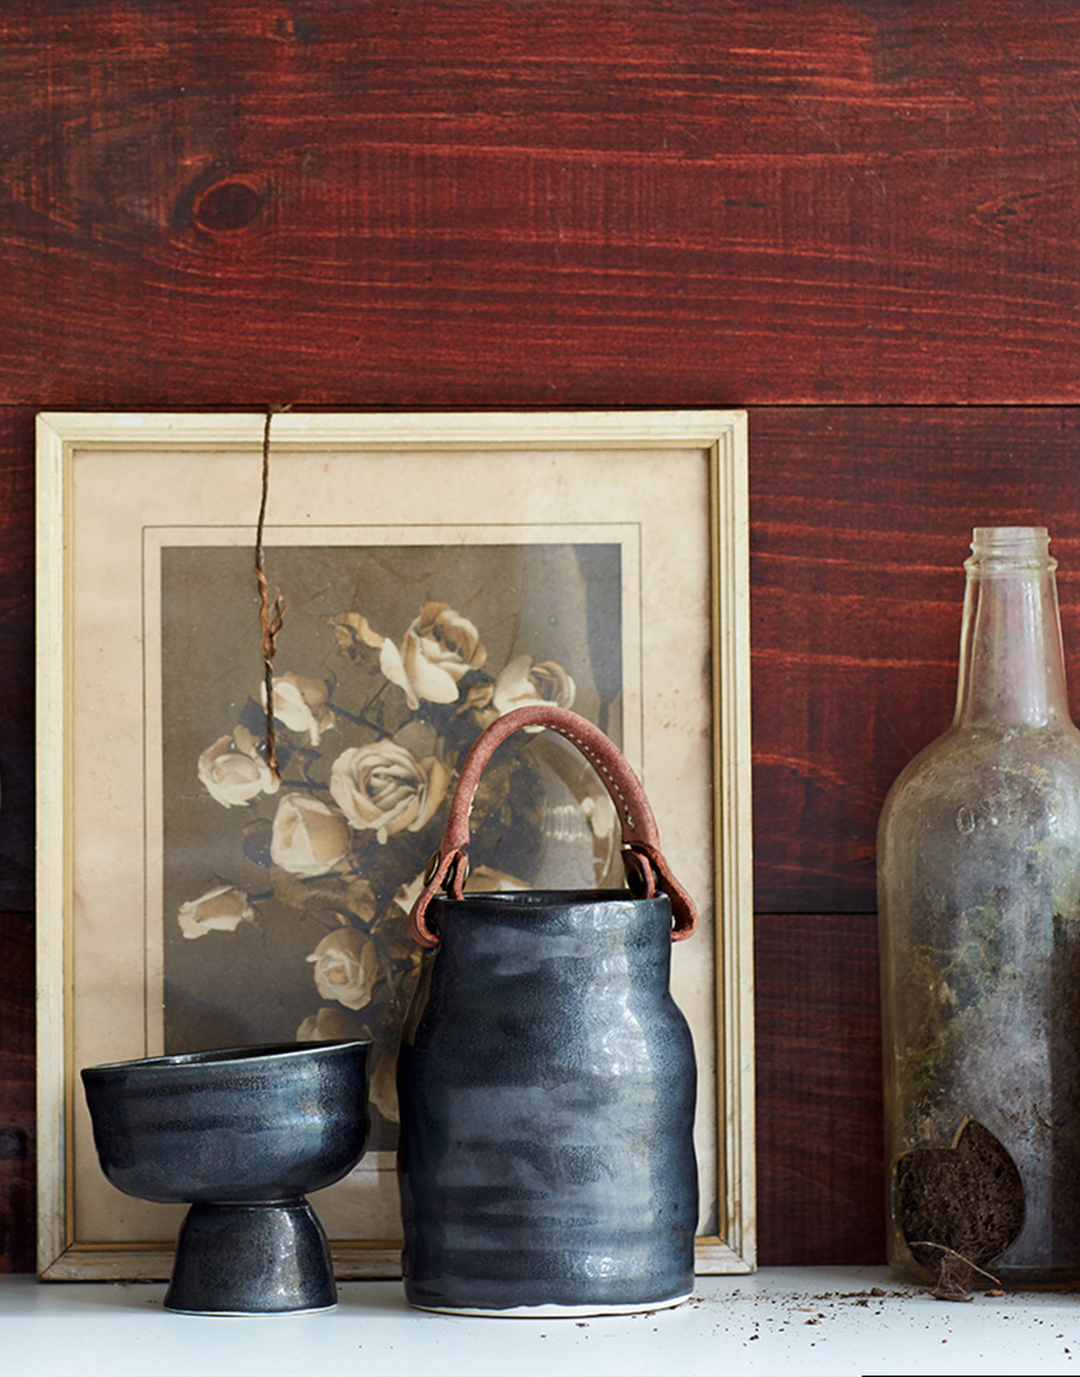 DBO HOME artisan black utility vessel with hand stitched leather handle in front of vintage flower photograph and red wood wall